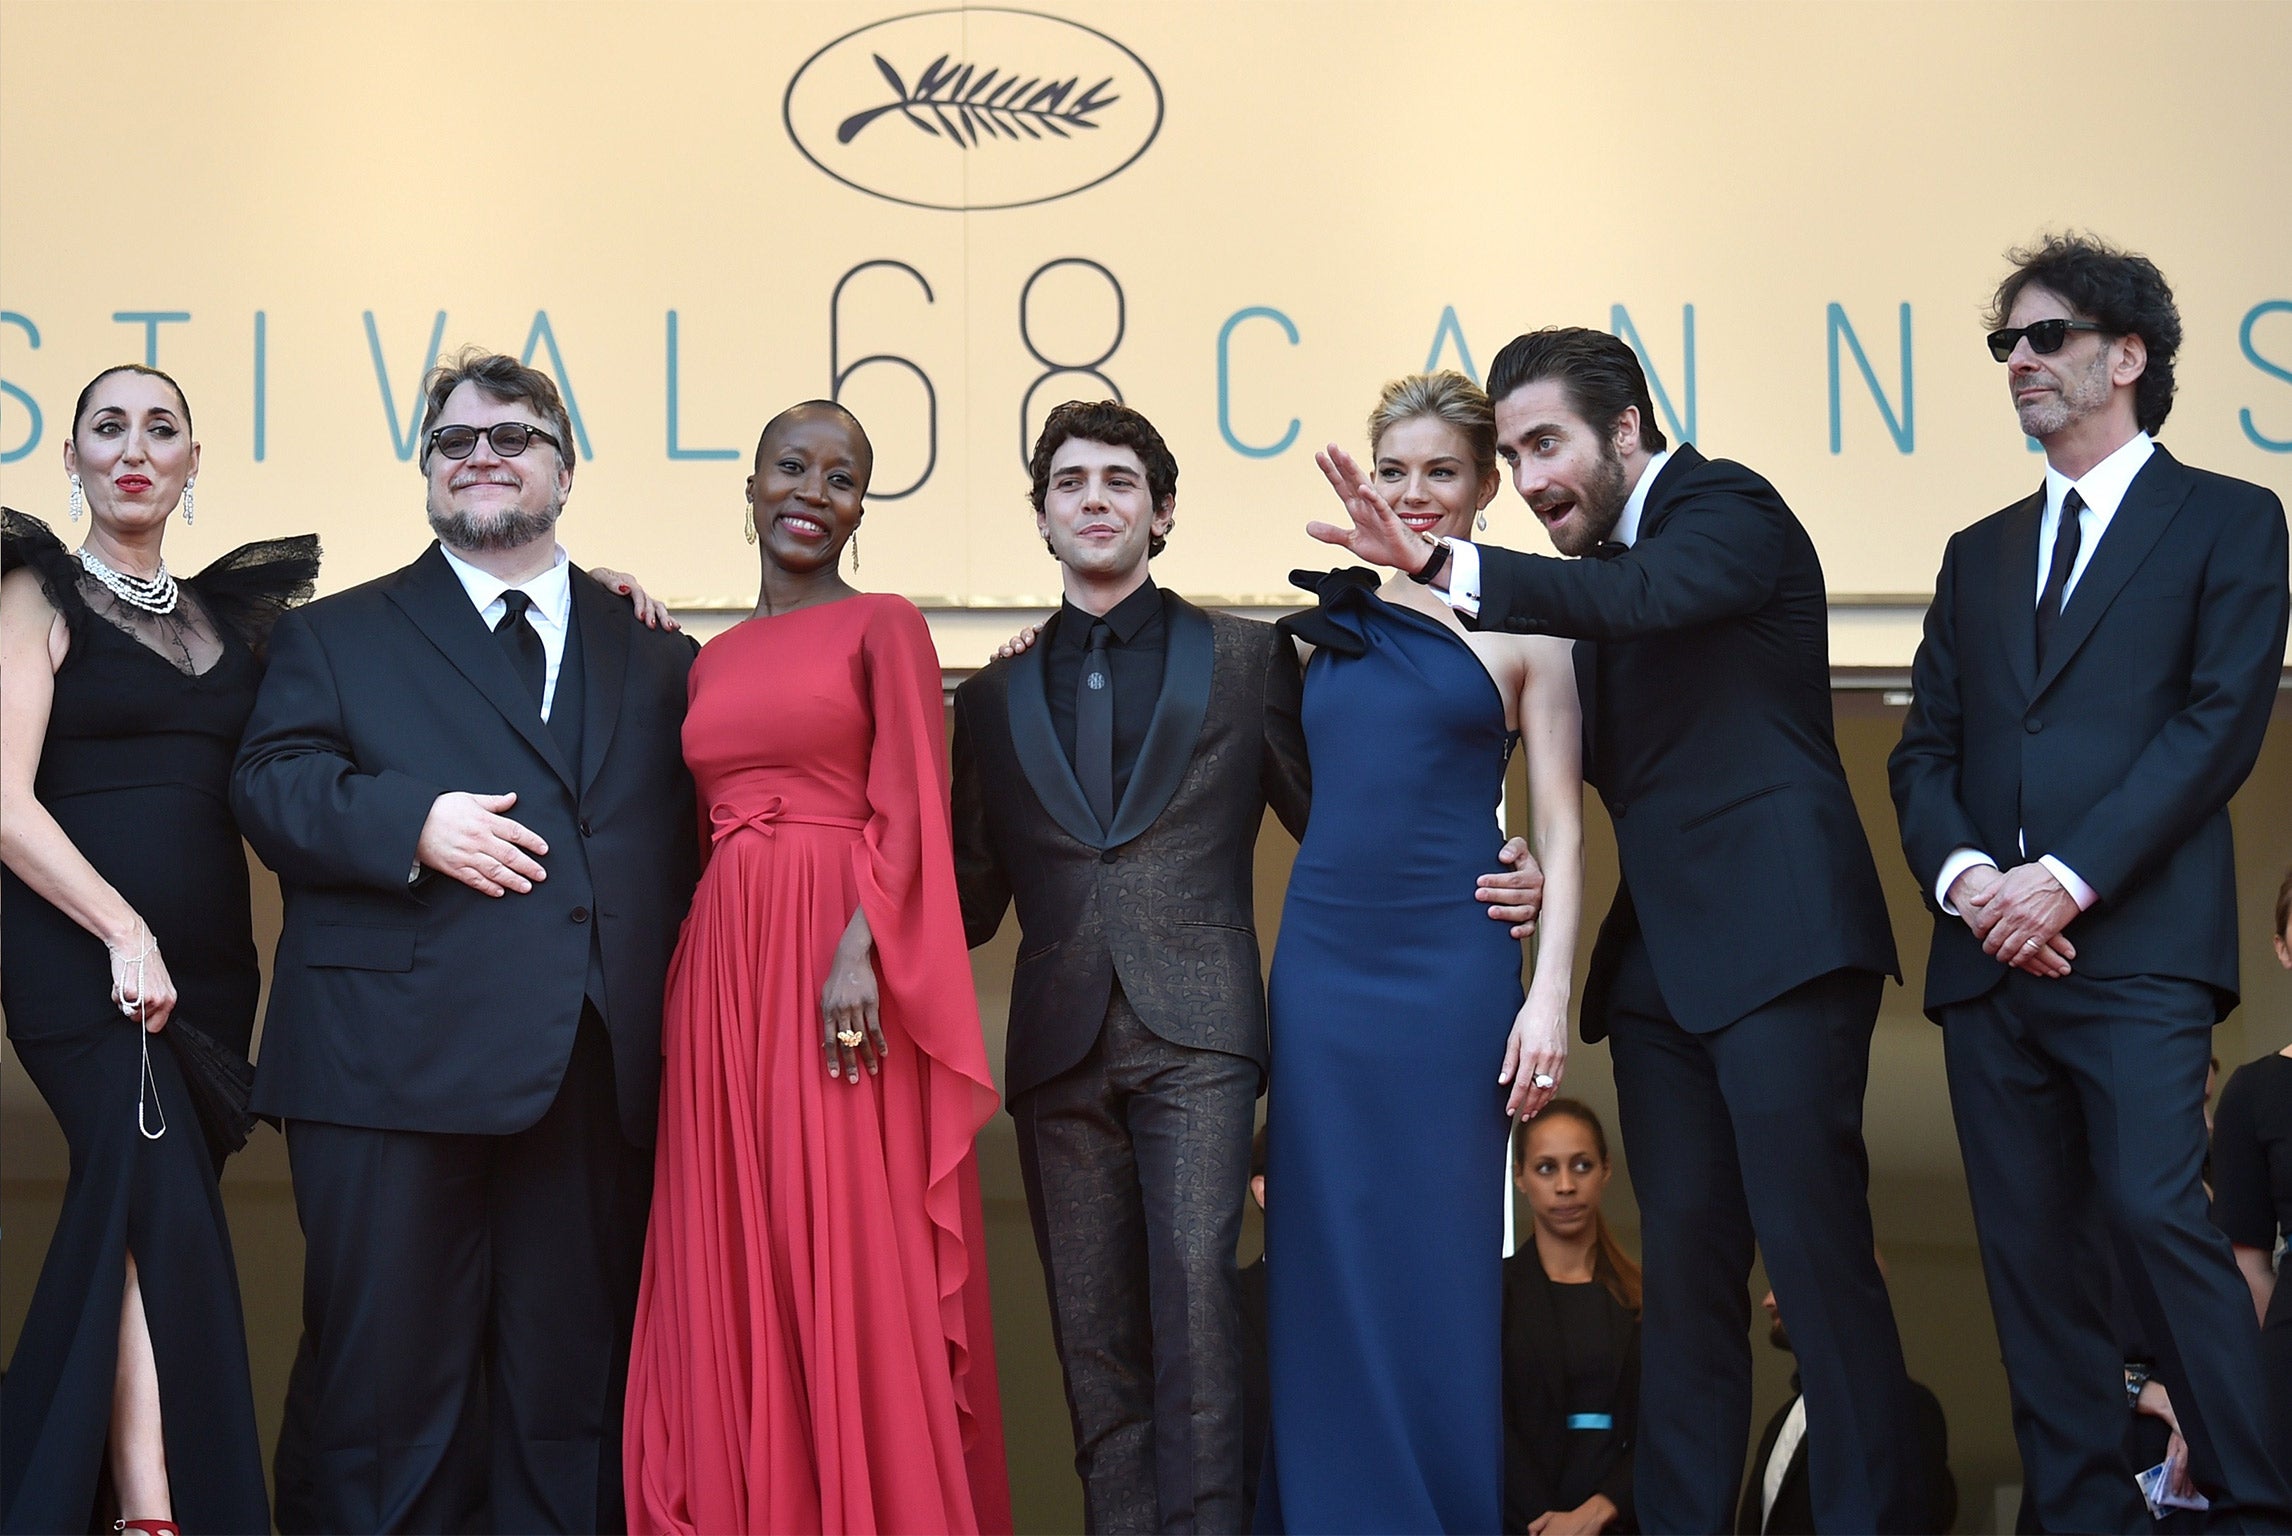 Jury members, from left: Spanish actress Rossy de Palma, Mexican director Guillermo del Toro, Malian singer/songwriter Rokia Traore, Canadian director Xavier Dolan, British actress Sienna Miller, US actor Jake Gyllenhaal and US director and President of t